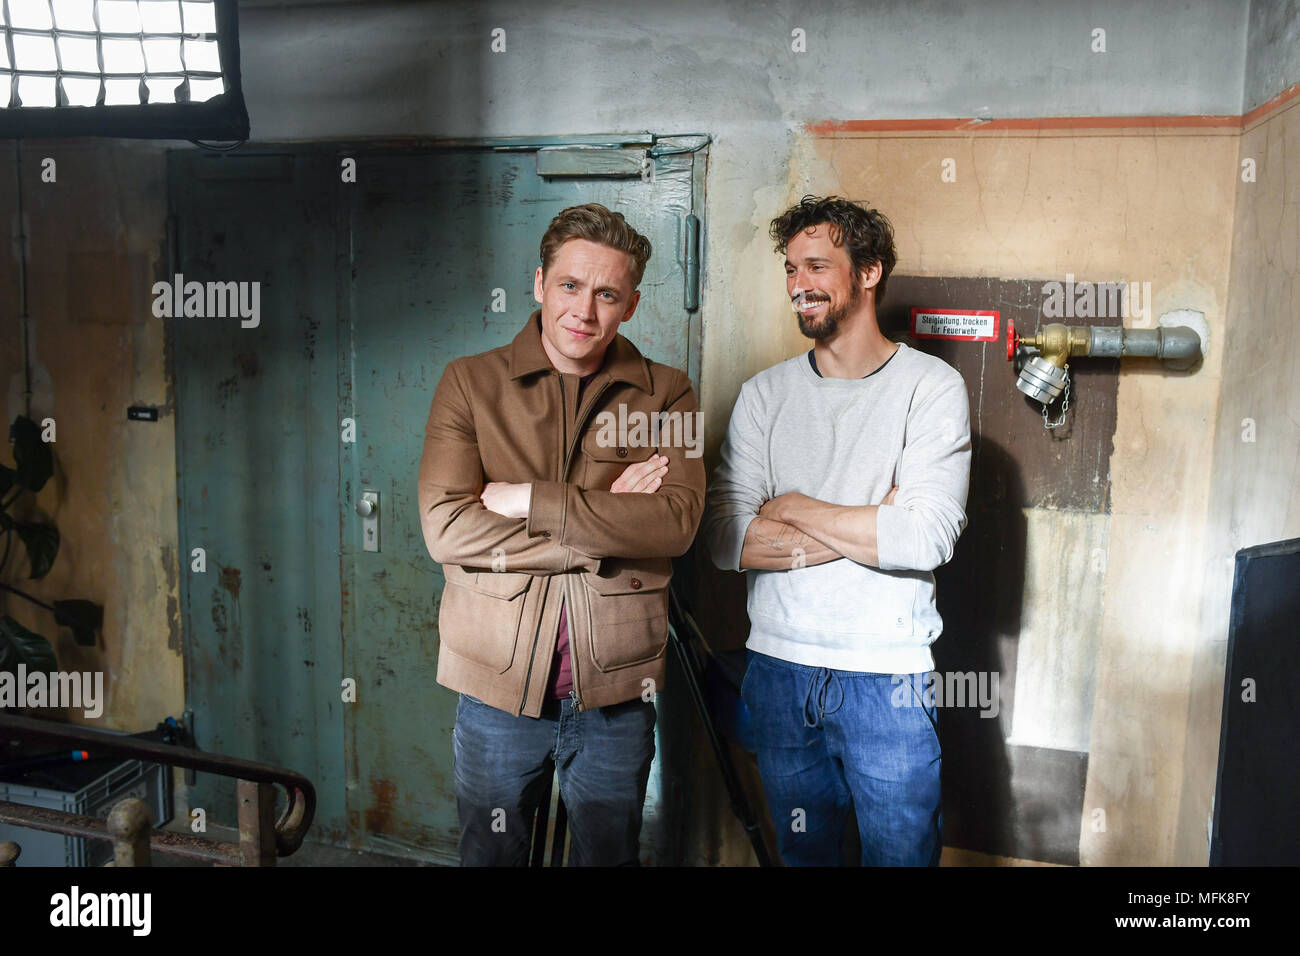 https://c8.alamy.com/comp/MFK8FY/25april-2018-germany-berlin-actor-matthias-schweighoefer-l-and-director-and-actor-florian-david-fitz-pictured-on-the-set-of-their-new-film-100-dinge-in-the-kreuzberg-area-of-berlin-photo-jens-kalaenedpa-zentralbilddpa-MFK8FY.jpg